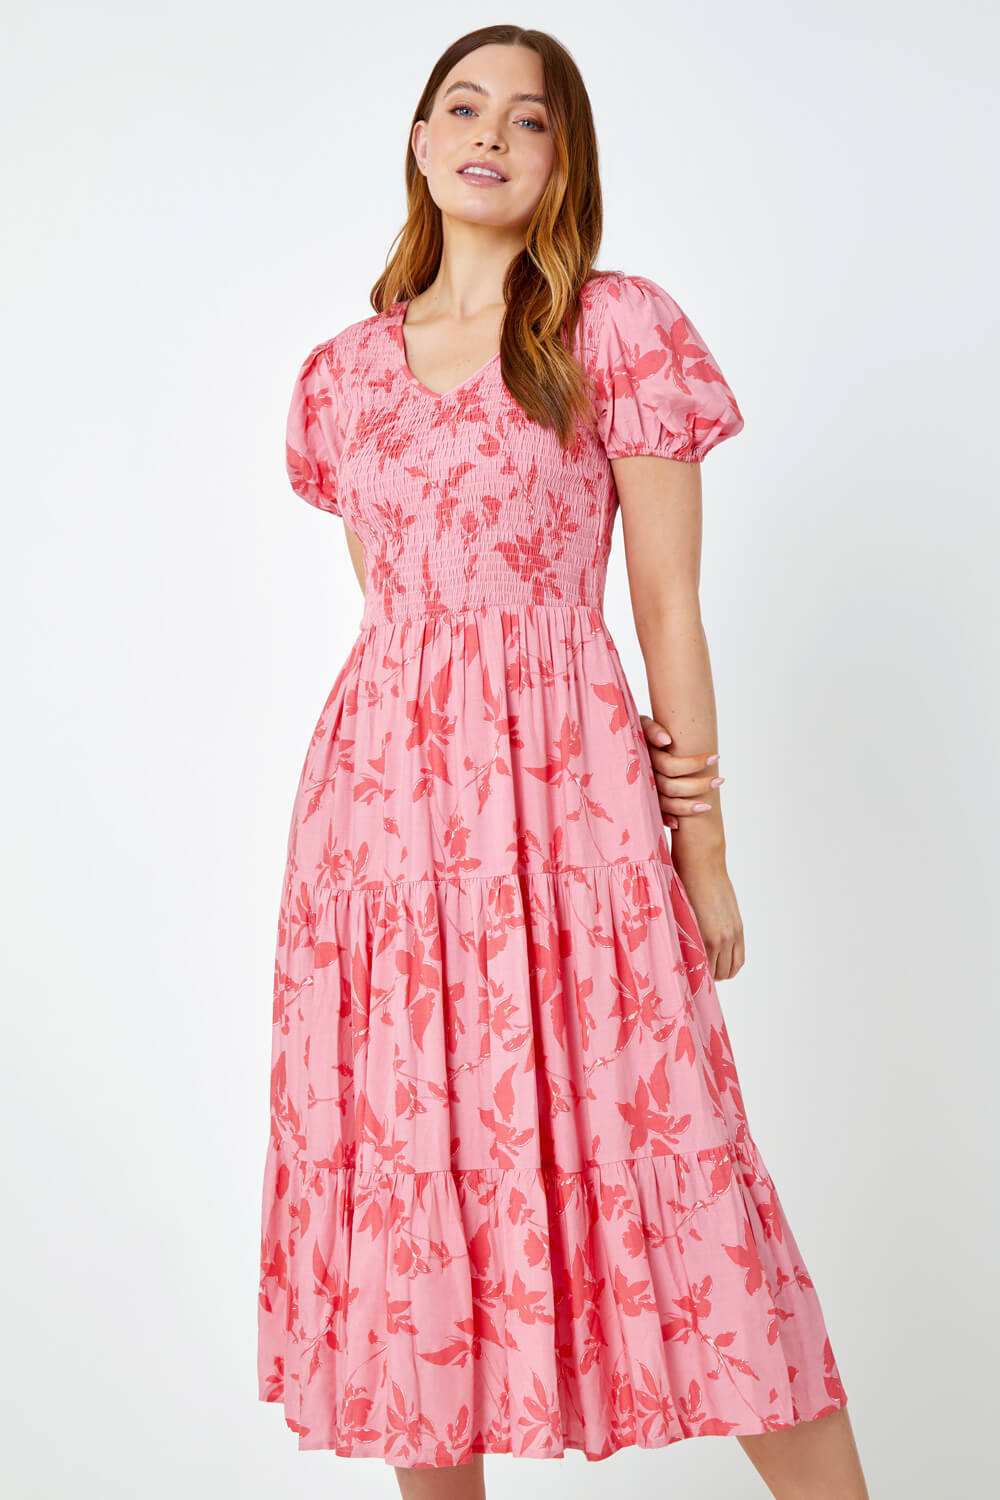 PINK Floral Shirred Waist Tiered Midi Dress, Image 3 of 6